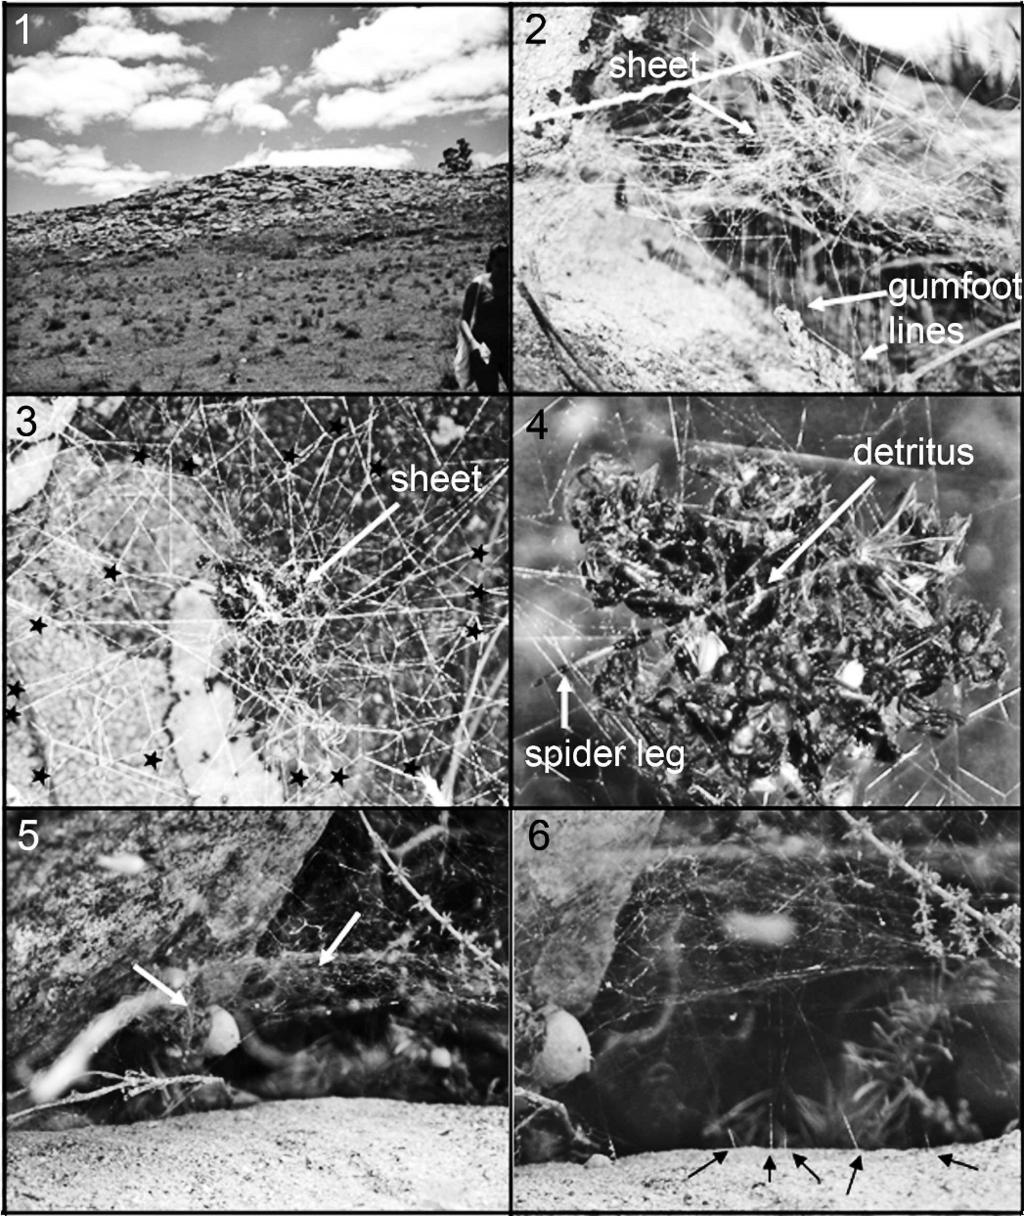 BARRANTES & EBERHARD WEB ONTOGENY CHANGES IN THERIDIIDS 487 Figures 1 6. Habitat and web traits in the field of late-instar Latrodectus mirabilis. 1. Outcrop of large rocks where different-instar L.